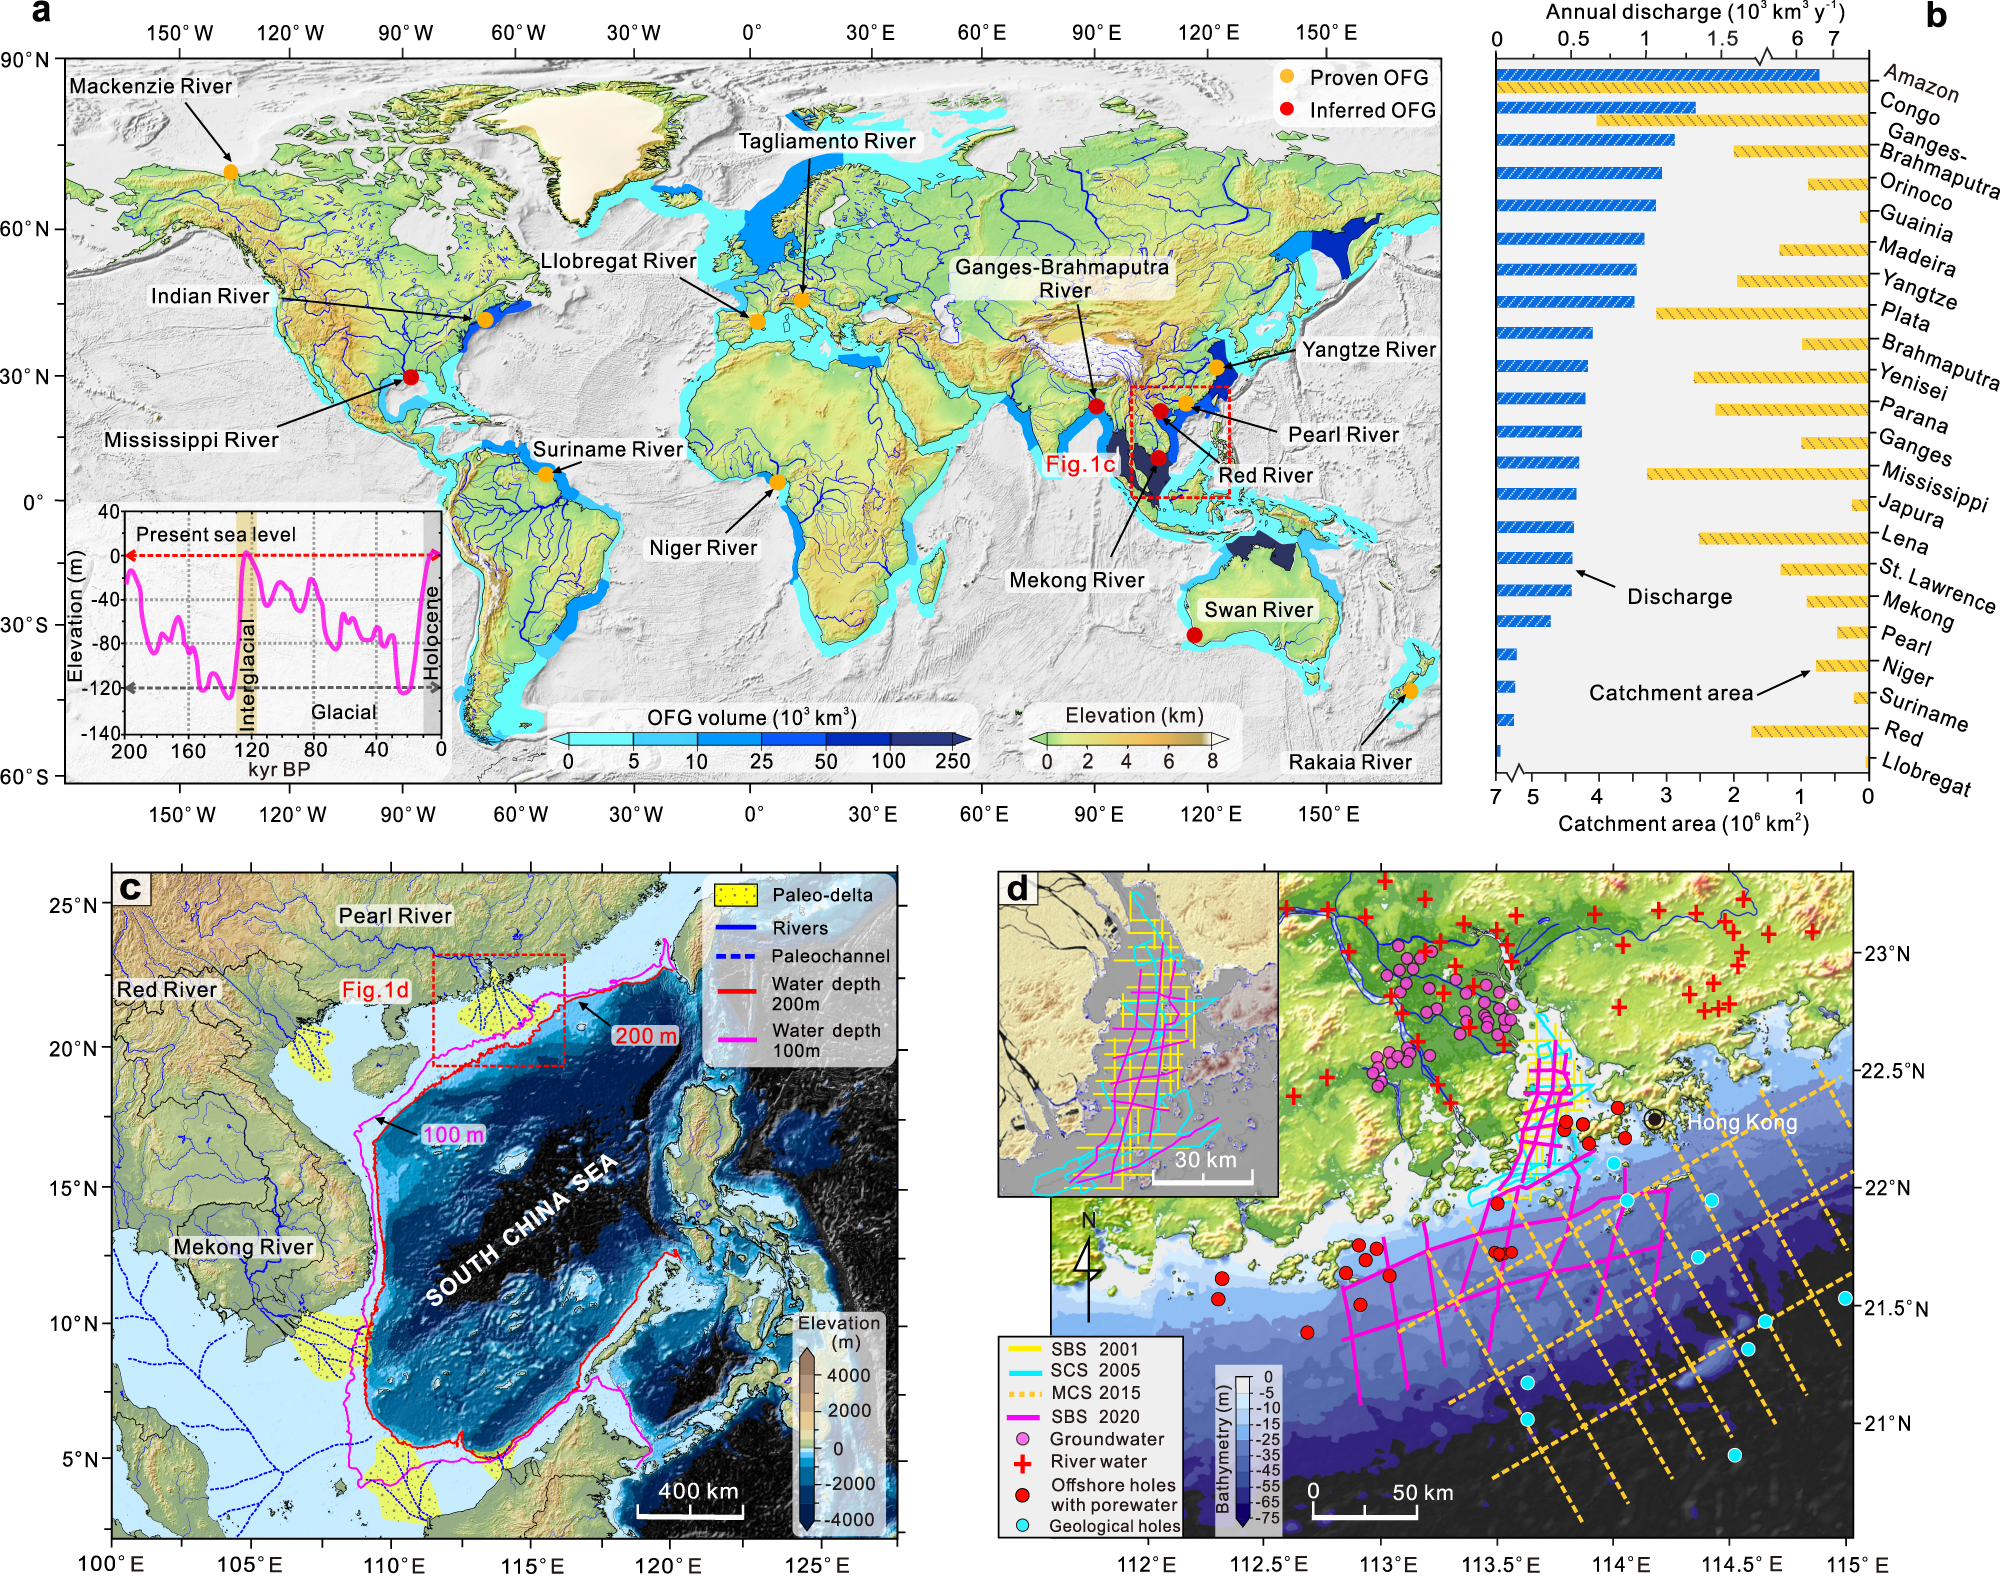 Offshore freshened groundwater in the Pearl River estuary and